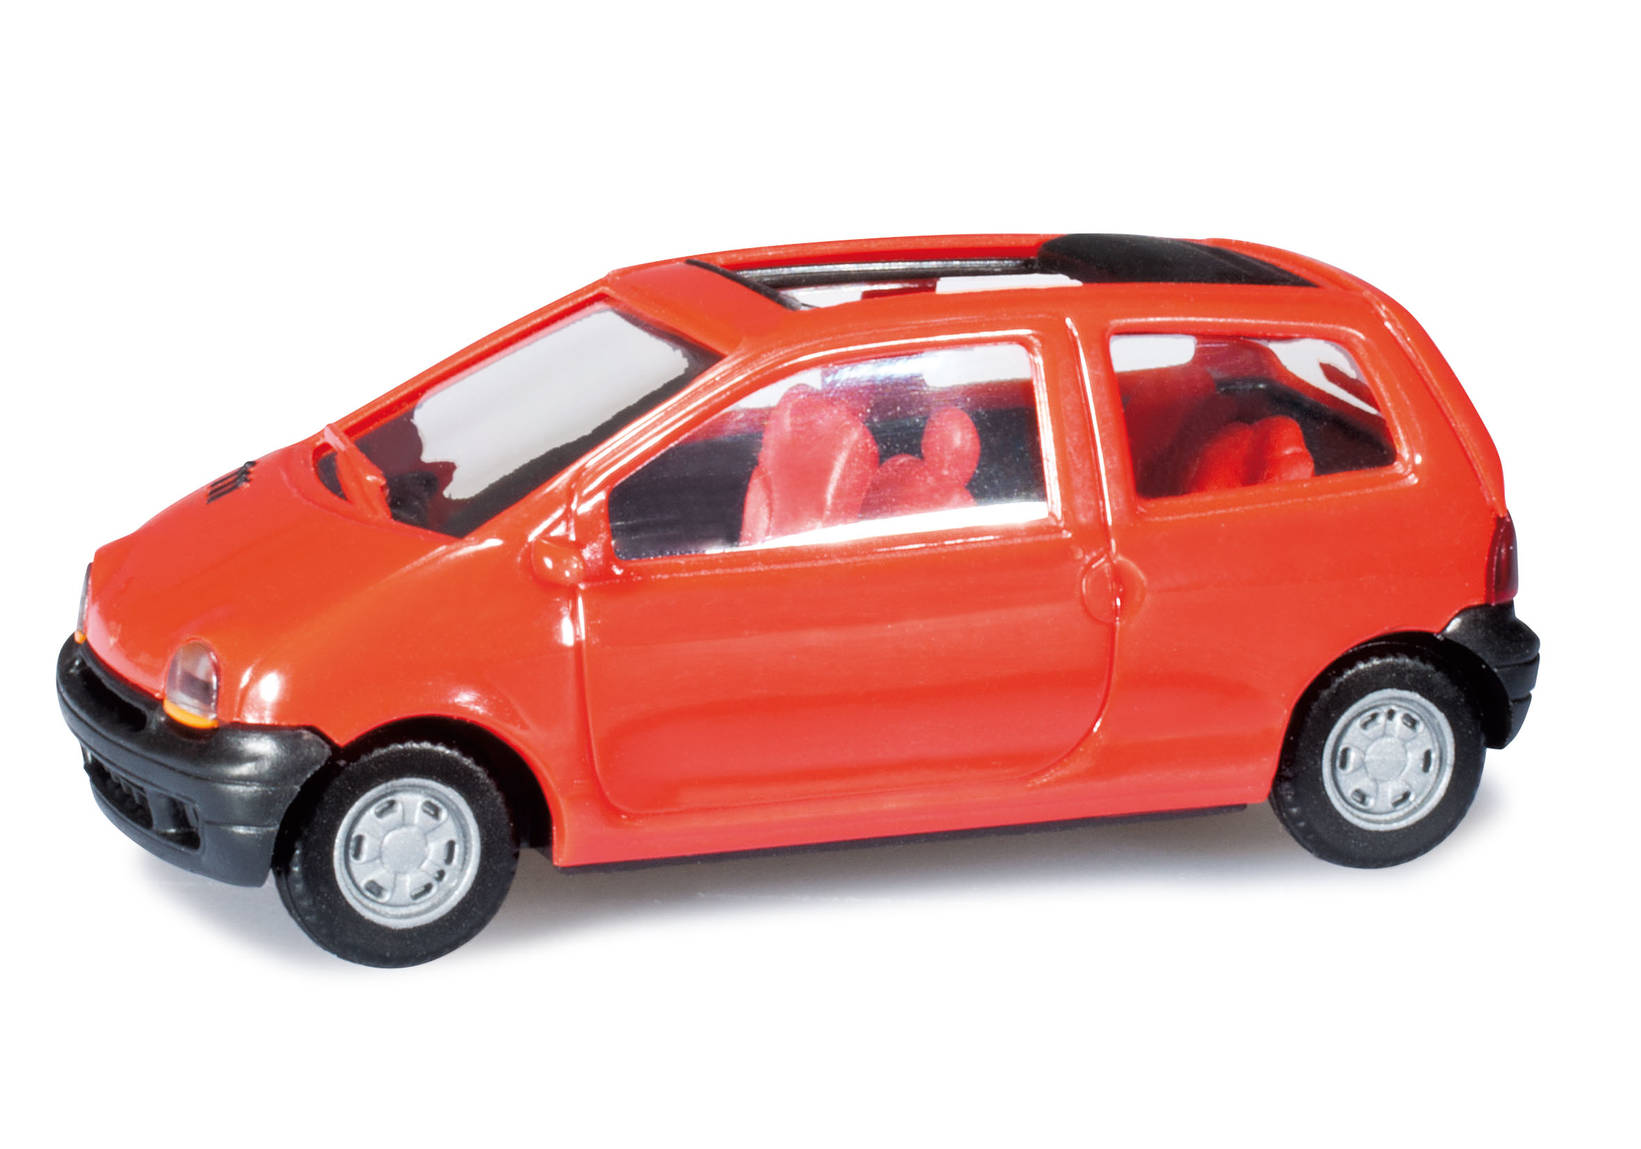 Renault Twingo, with folding top open, light red